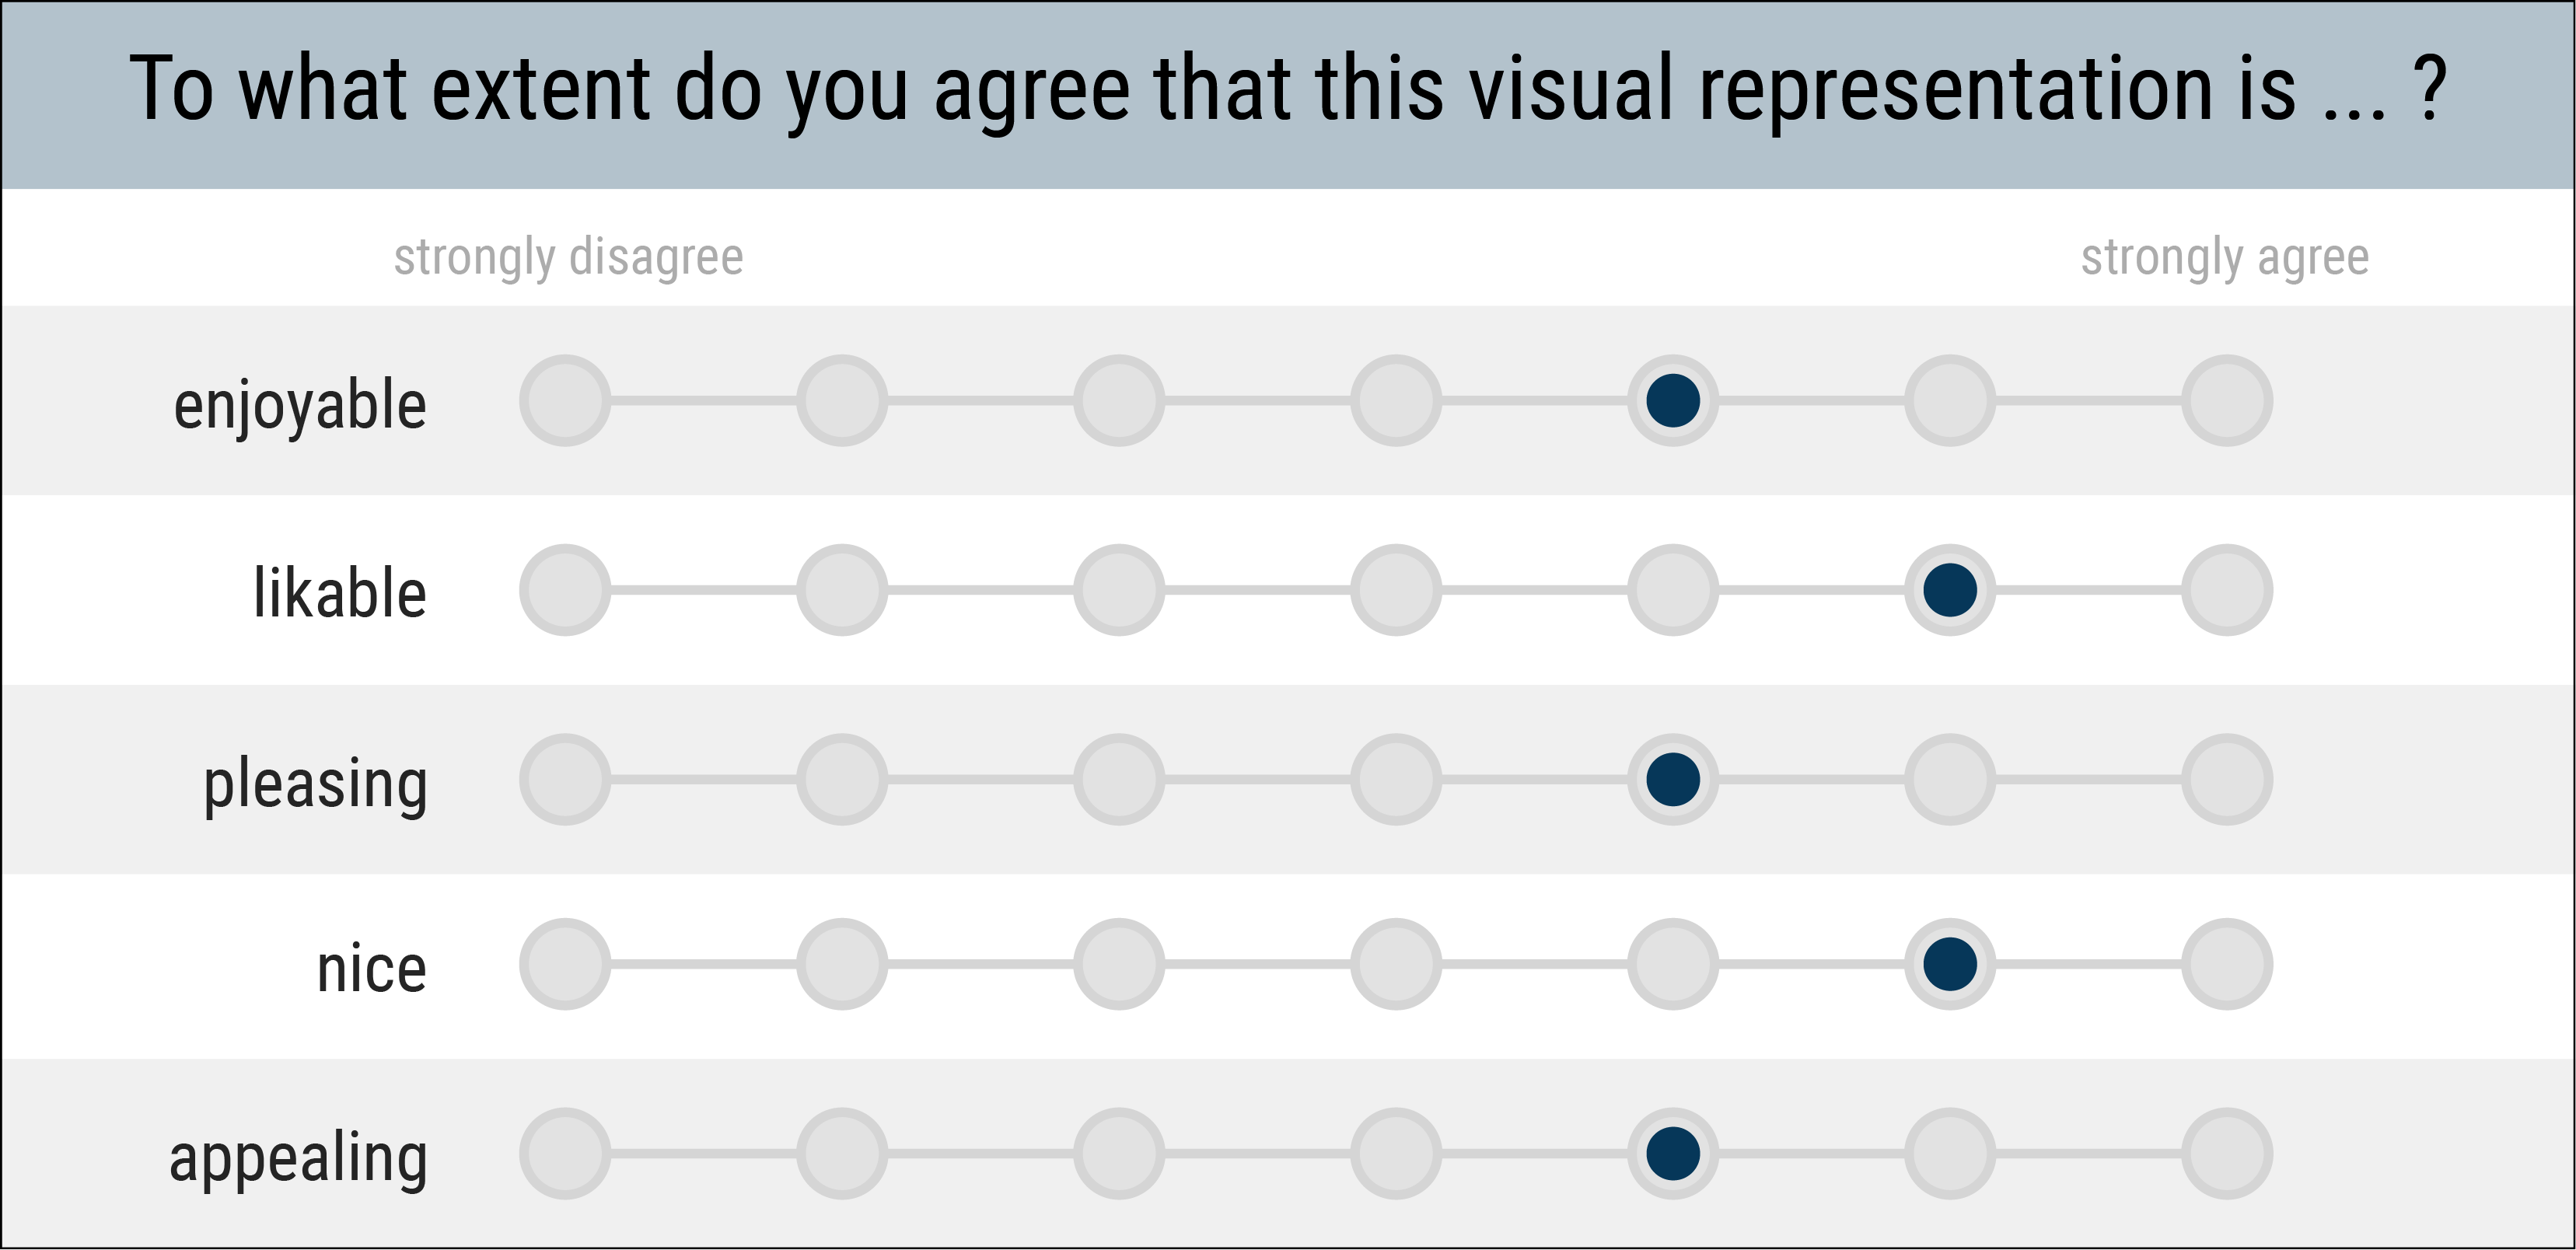 Our BeauVis scale in its recommended version showing 5 Likert items with the prompts: enjoyable, likable, pleasing, nice, appealing. The question on to top reads To what extent do you agree that this visualization is...? The end-points of the Likert items range from strongly disagree to strongly agree.